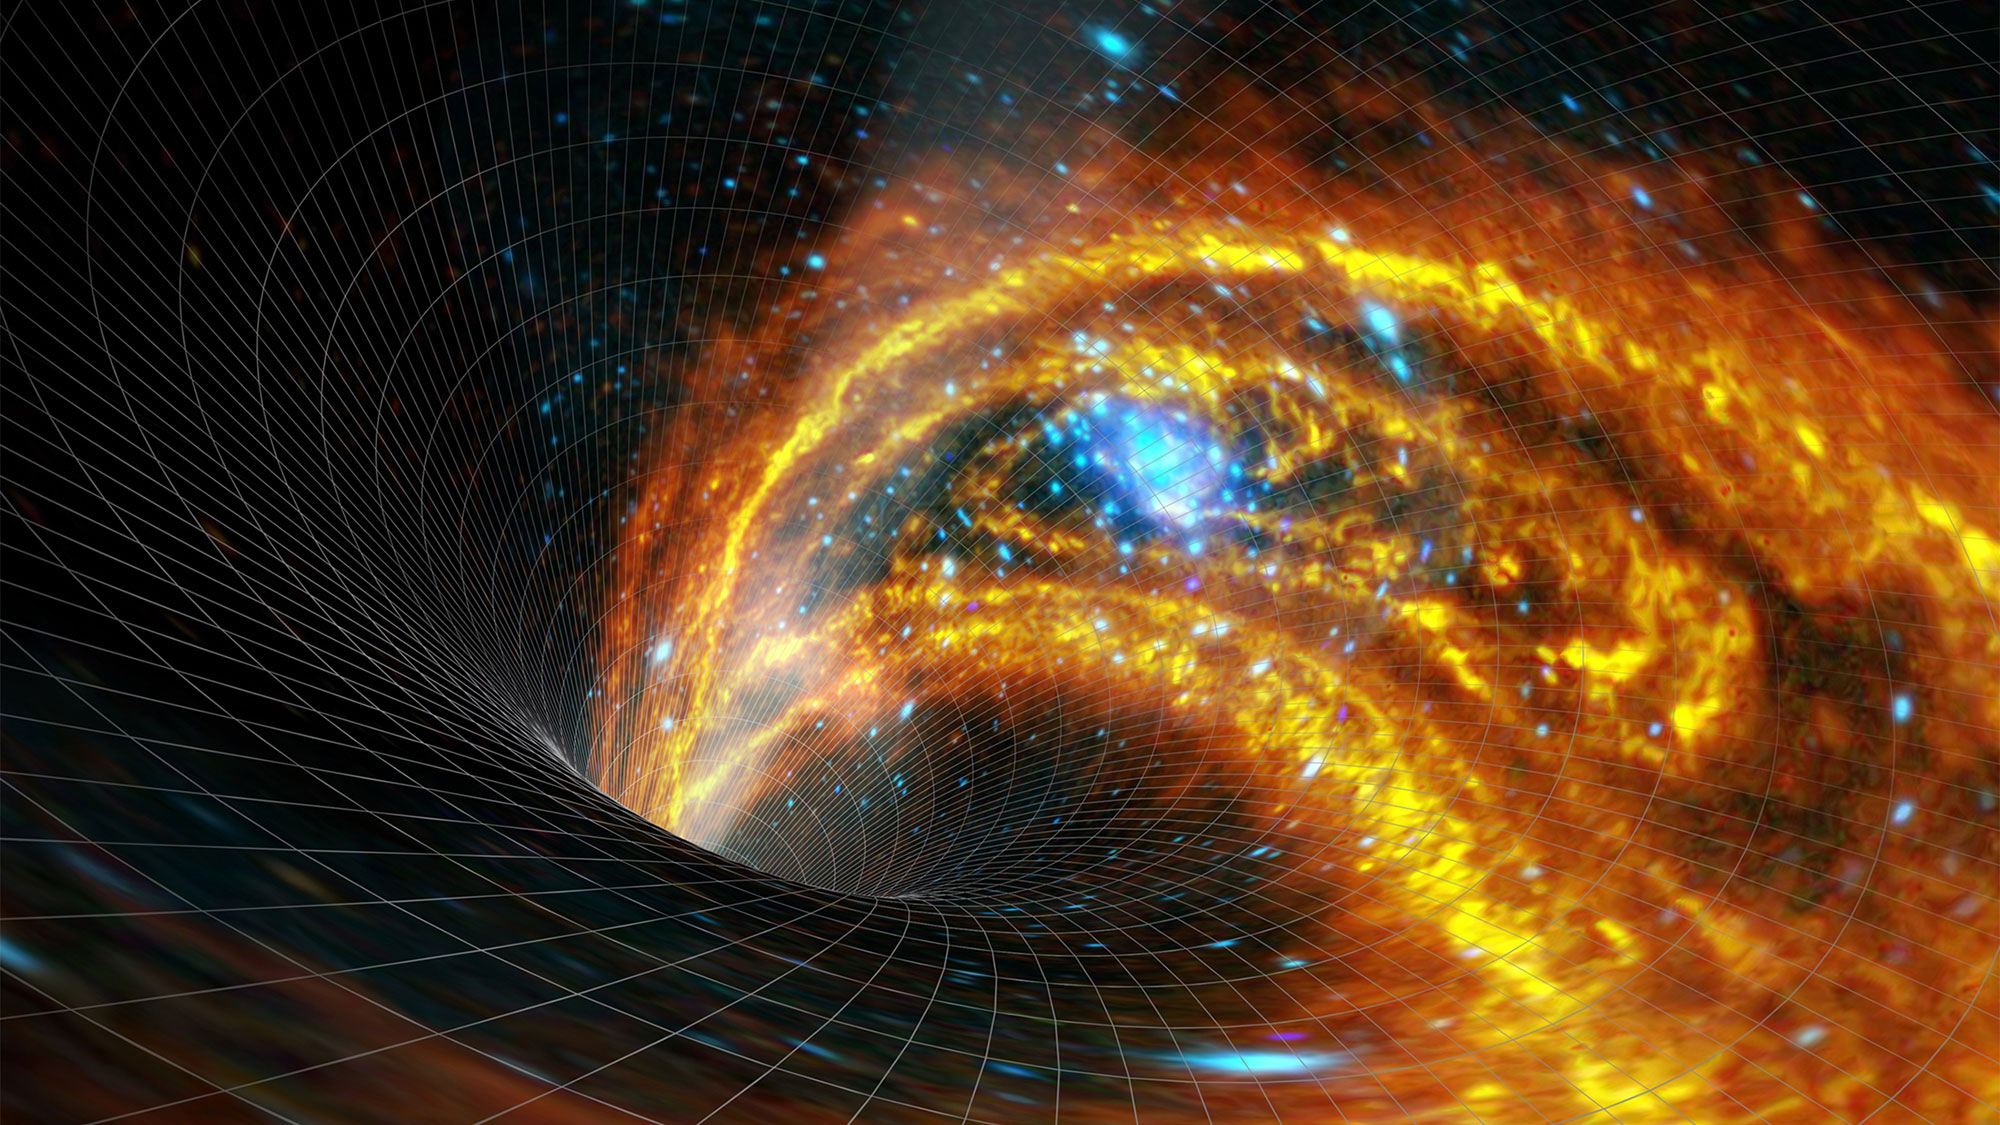 Stephen Hawking Was Right: Black Holes Can Evaporate, Weird New Study Shows  | Live Science